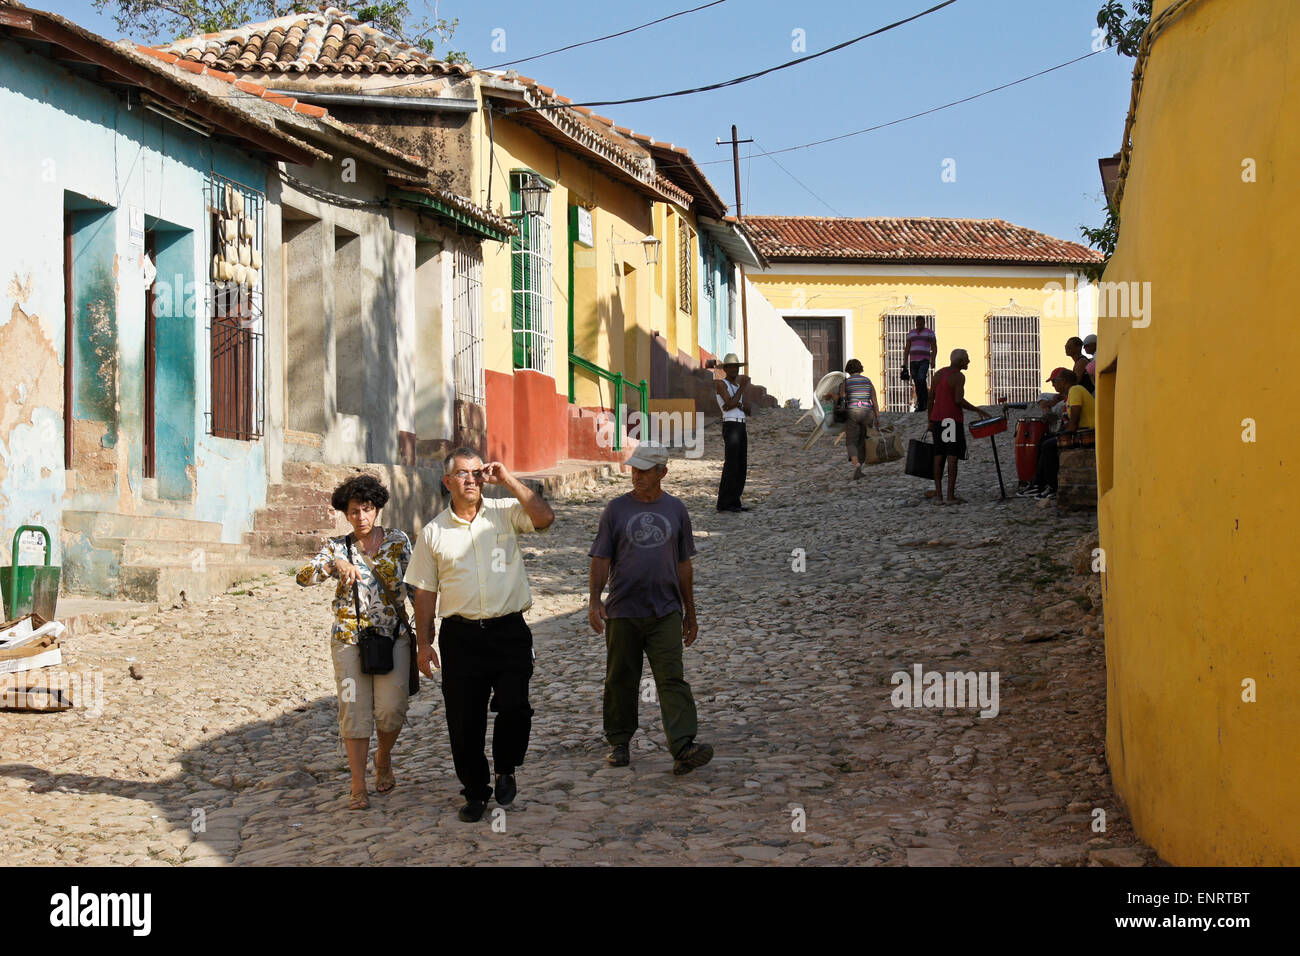 Colorful houses and cobblestone street in Trinidad, Cuba Stock Photo